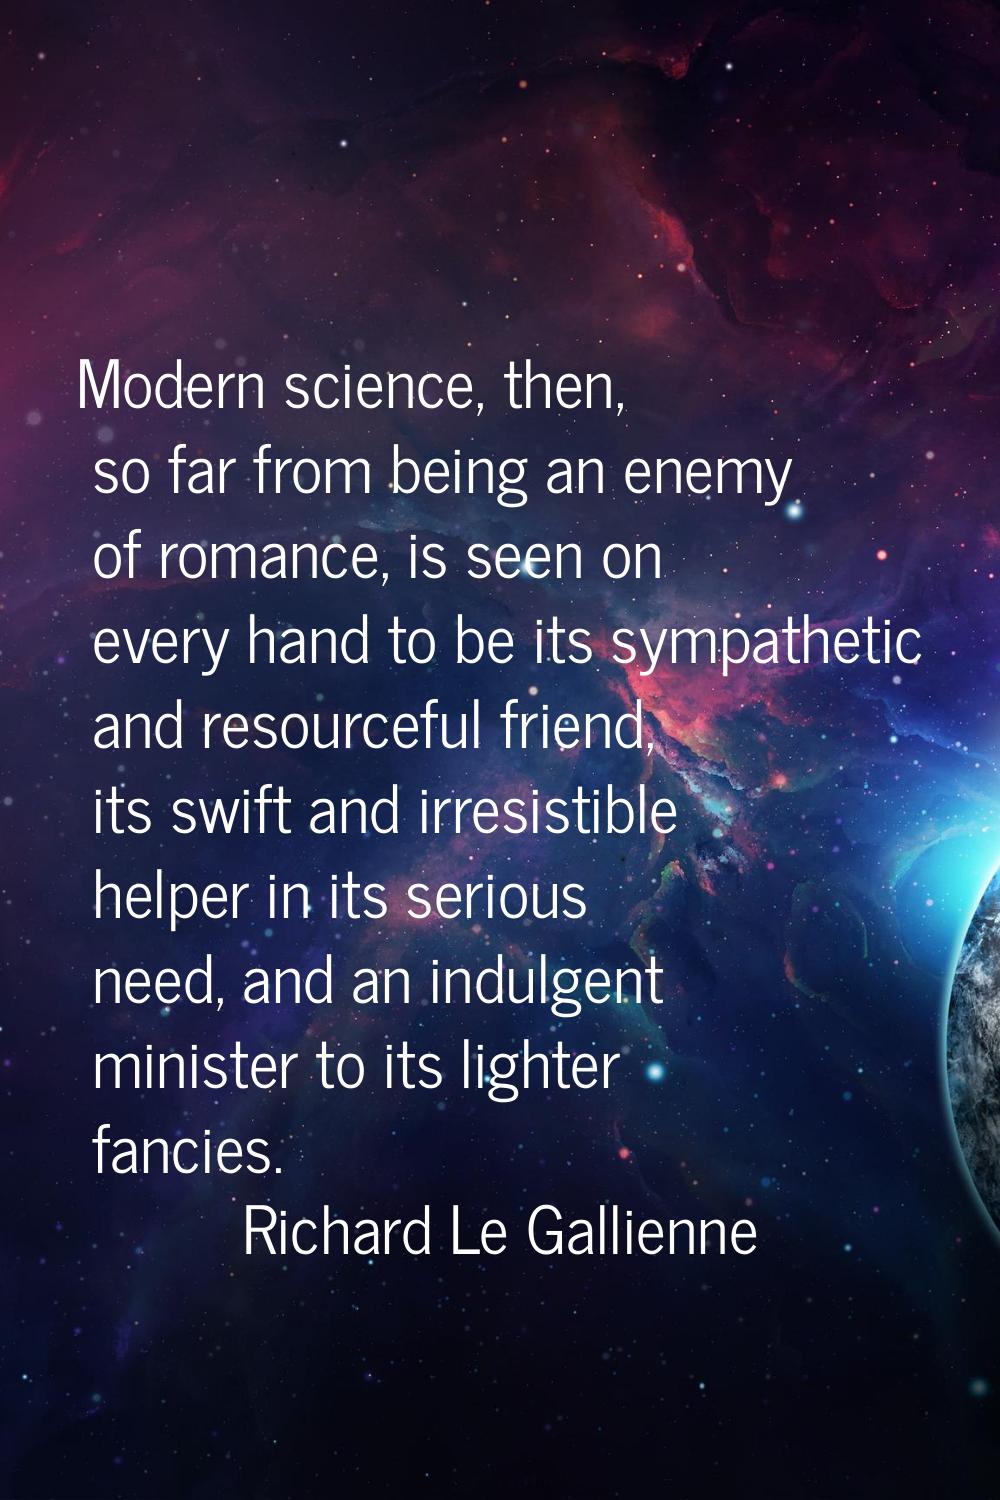 Modern science, then, so far from being an enemy of romance, is seen on every hand to be its sympat